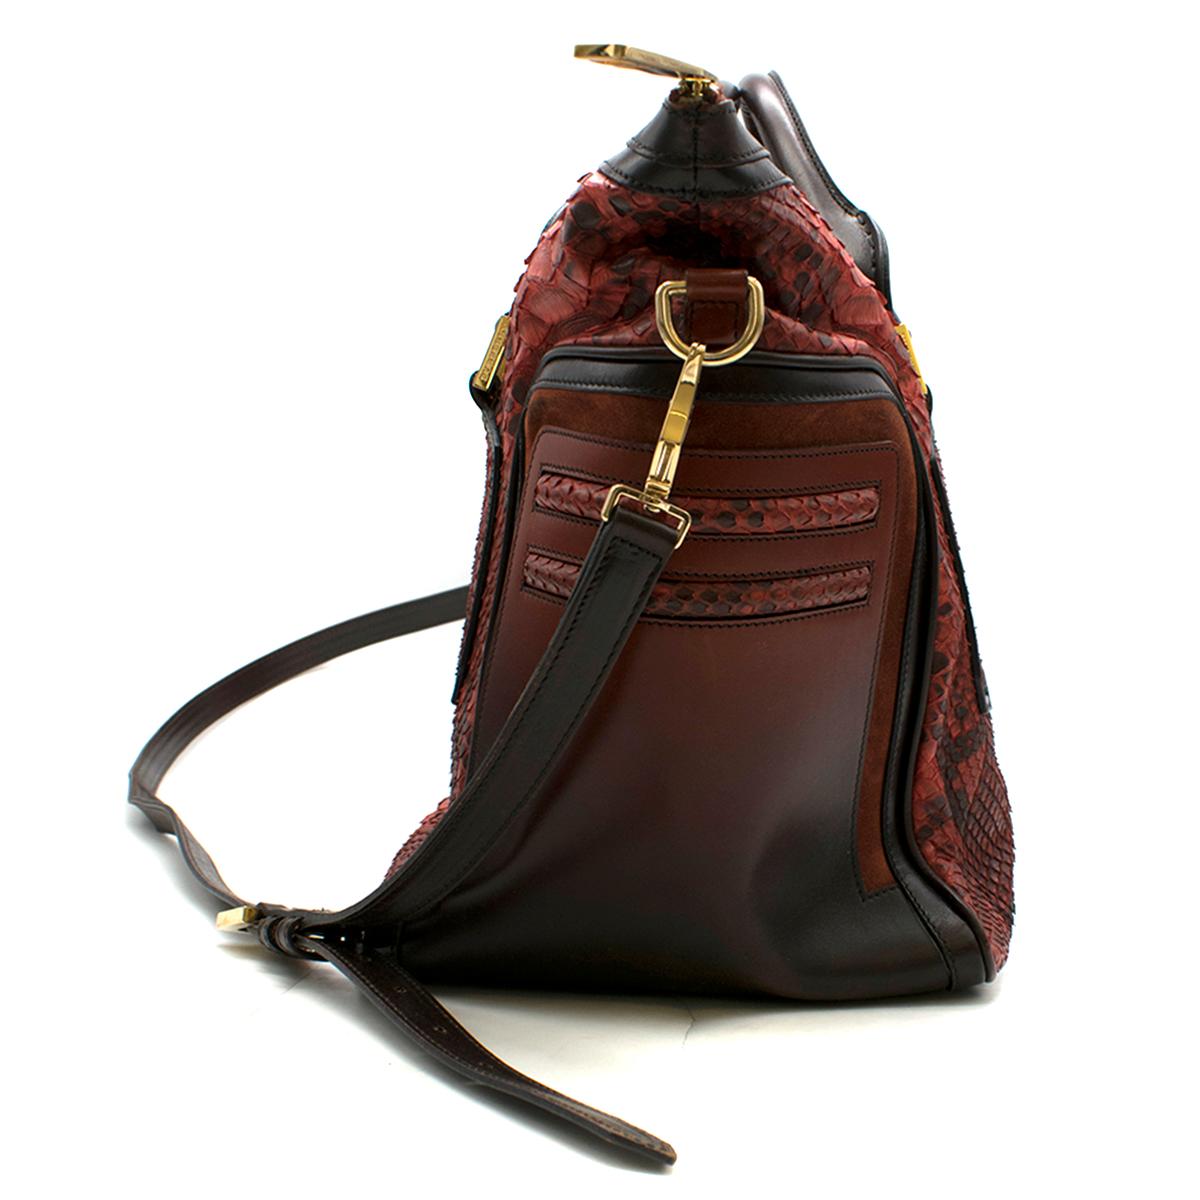 Burberry Red Large Python Travel Bag

-Red Python and leather exterior 
-Gold hardware
-Brown leather handles
-Removable and adjustable shoulder trap 
-Suede lining
-Two functional open pockets inside 
-One zip pocket inside 
-Gold zip closure